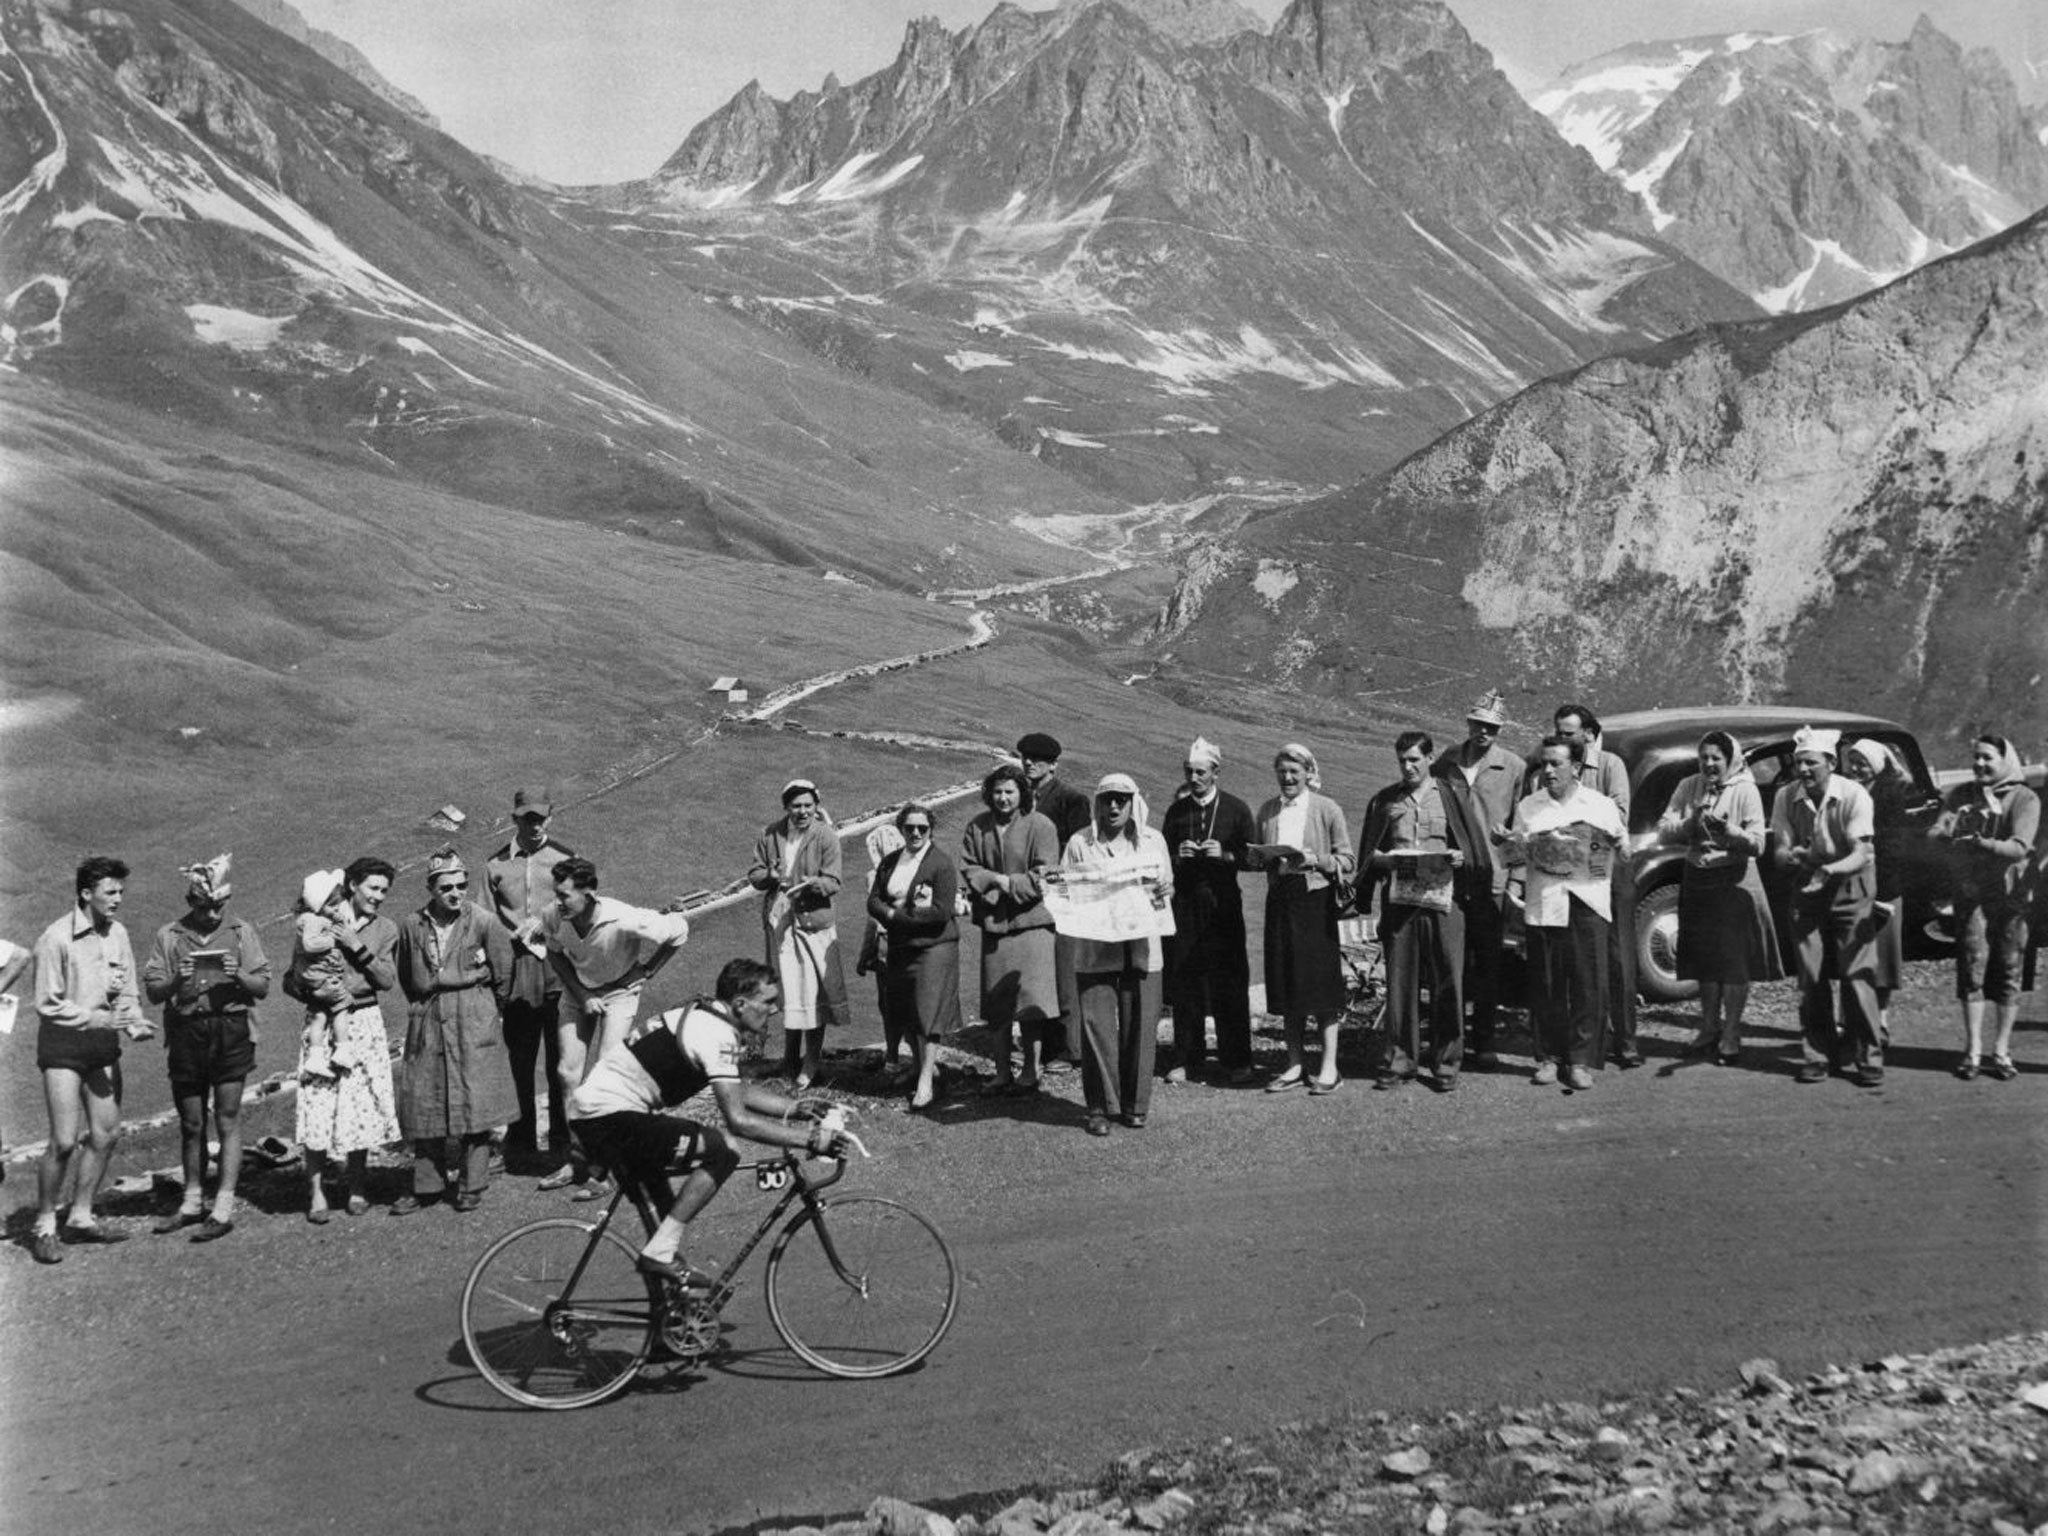 Brian Robinson suffers on the legendary climb of the Col du Galibier in the Alps in 1955